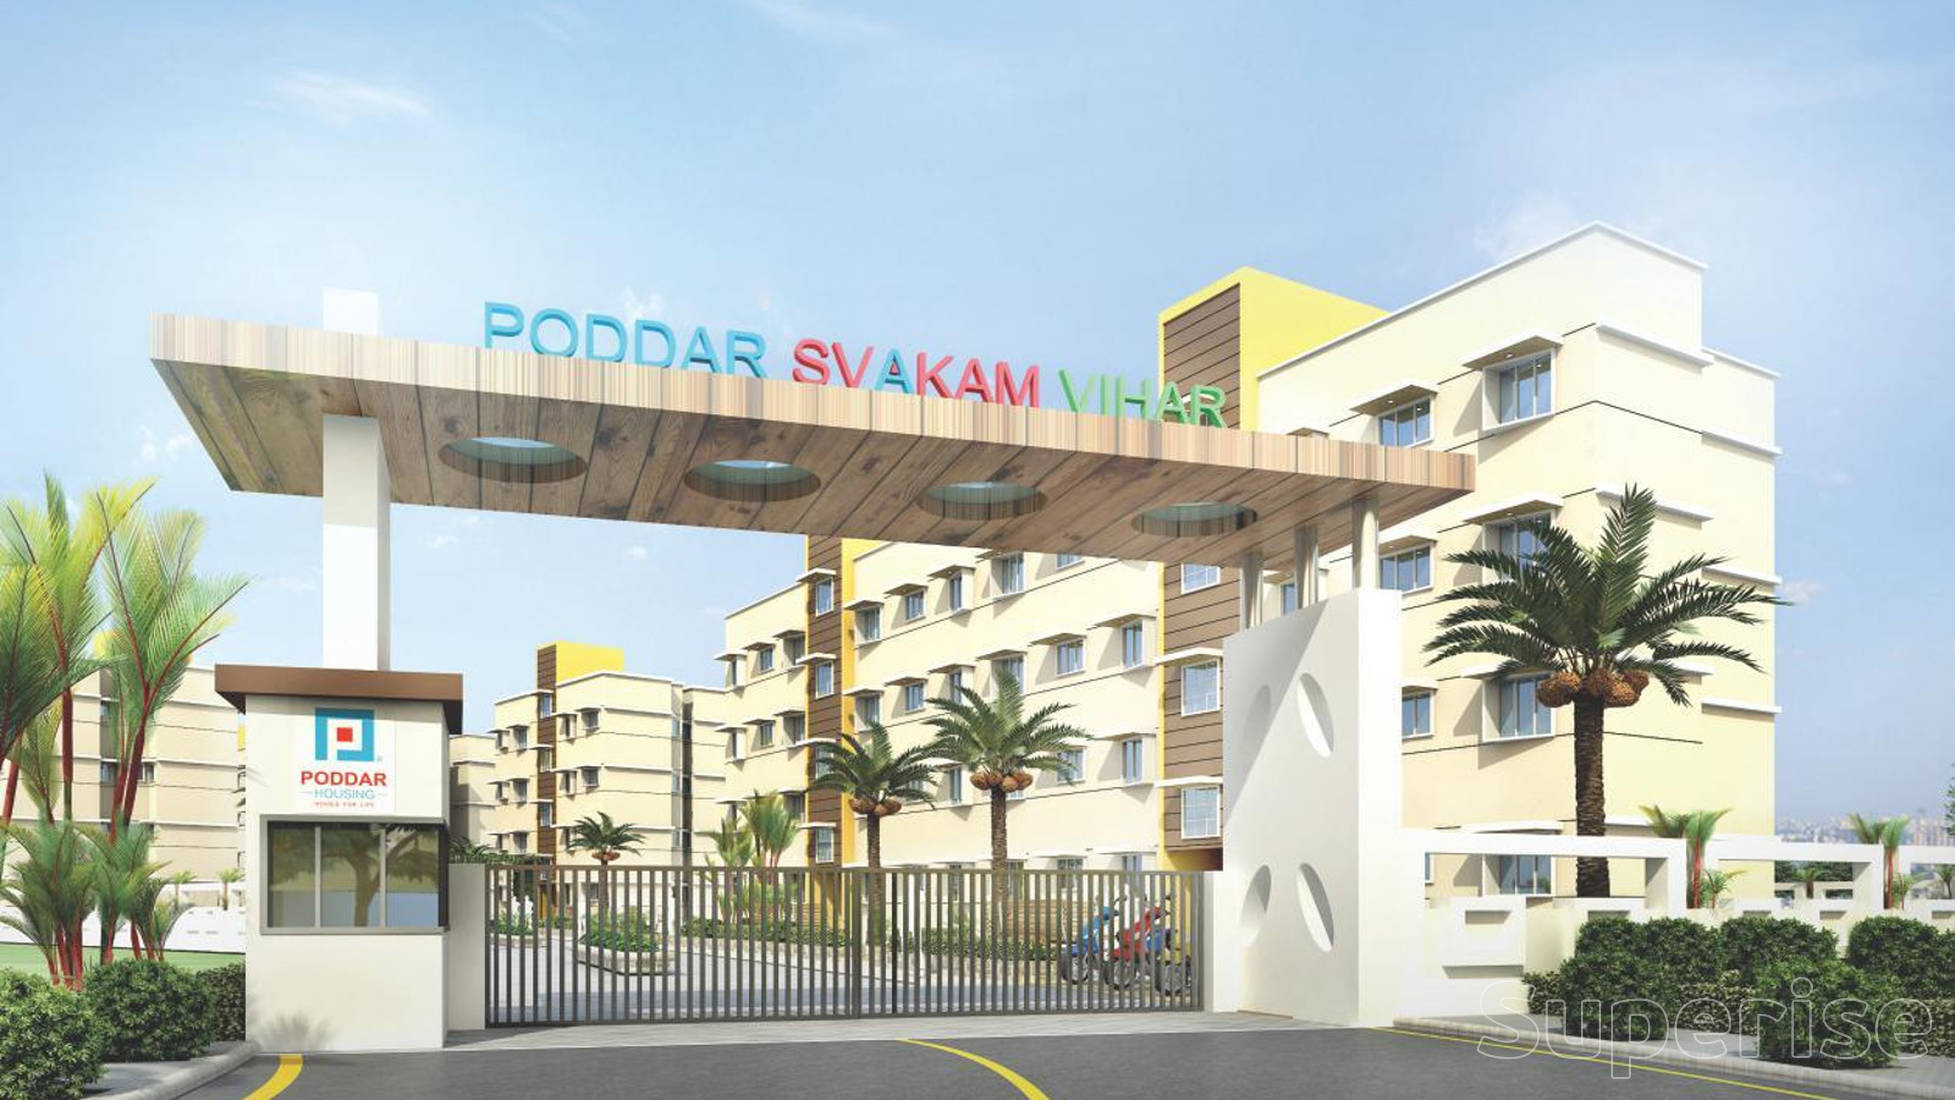 Poddar Housing to buy 102.5 acre land in Pune to develop residential project